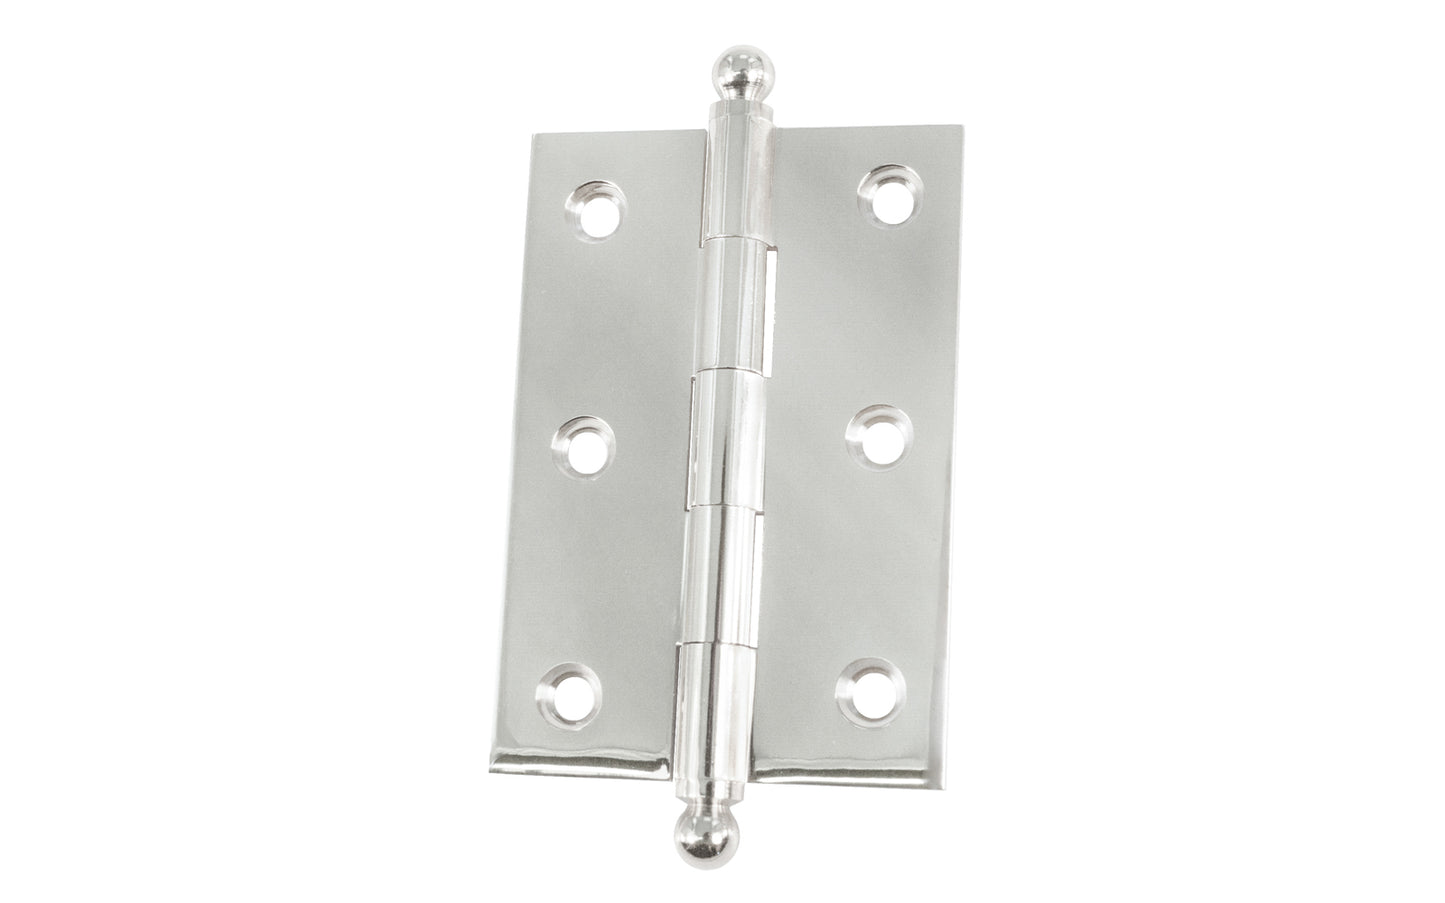 Classic Solid Brass Ball-Tip Cabinet Hinge ~ 2-1/2" x 1-3/4". Full mortise extruded hinges. 3/32" heavy duty leaf thickness gauge. Non-removable fixed hinge pin with ball tips. High quality thick cabinet hinge with ball tips. Polished  Chrome finish.